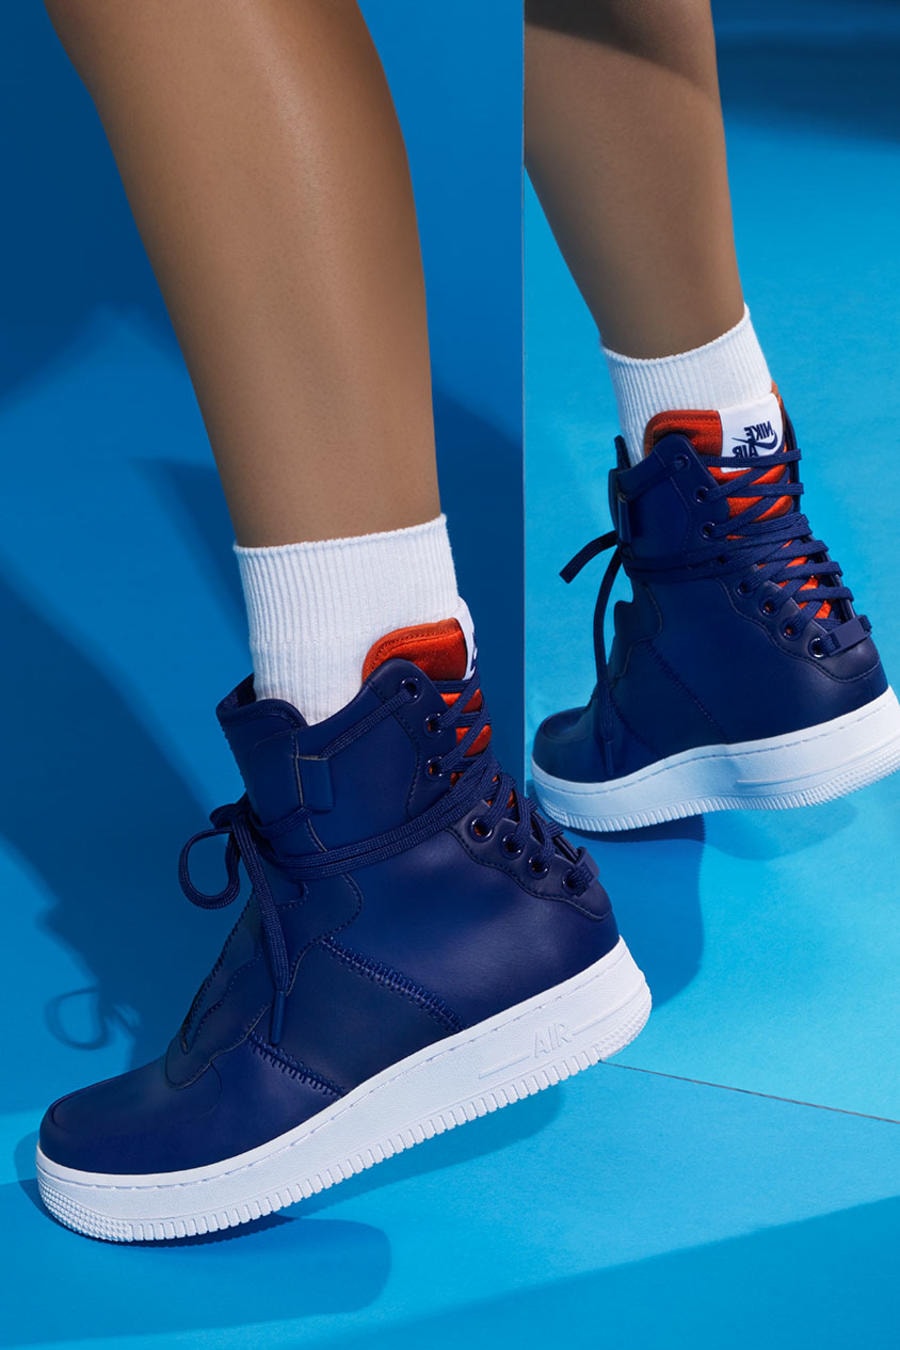 Nike Launches Air Force 1 Holiday Pack NBA Air Force 1 AF1 Rebel XX 270 Utility